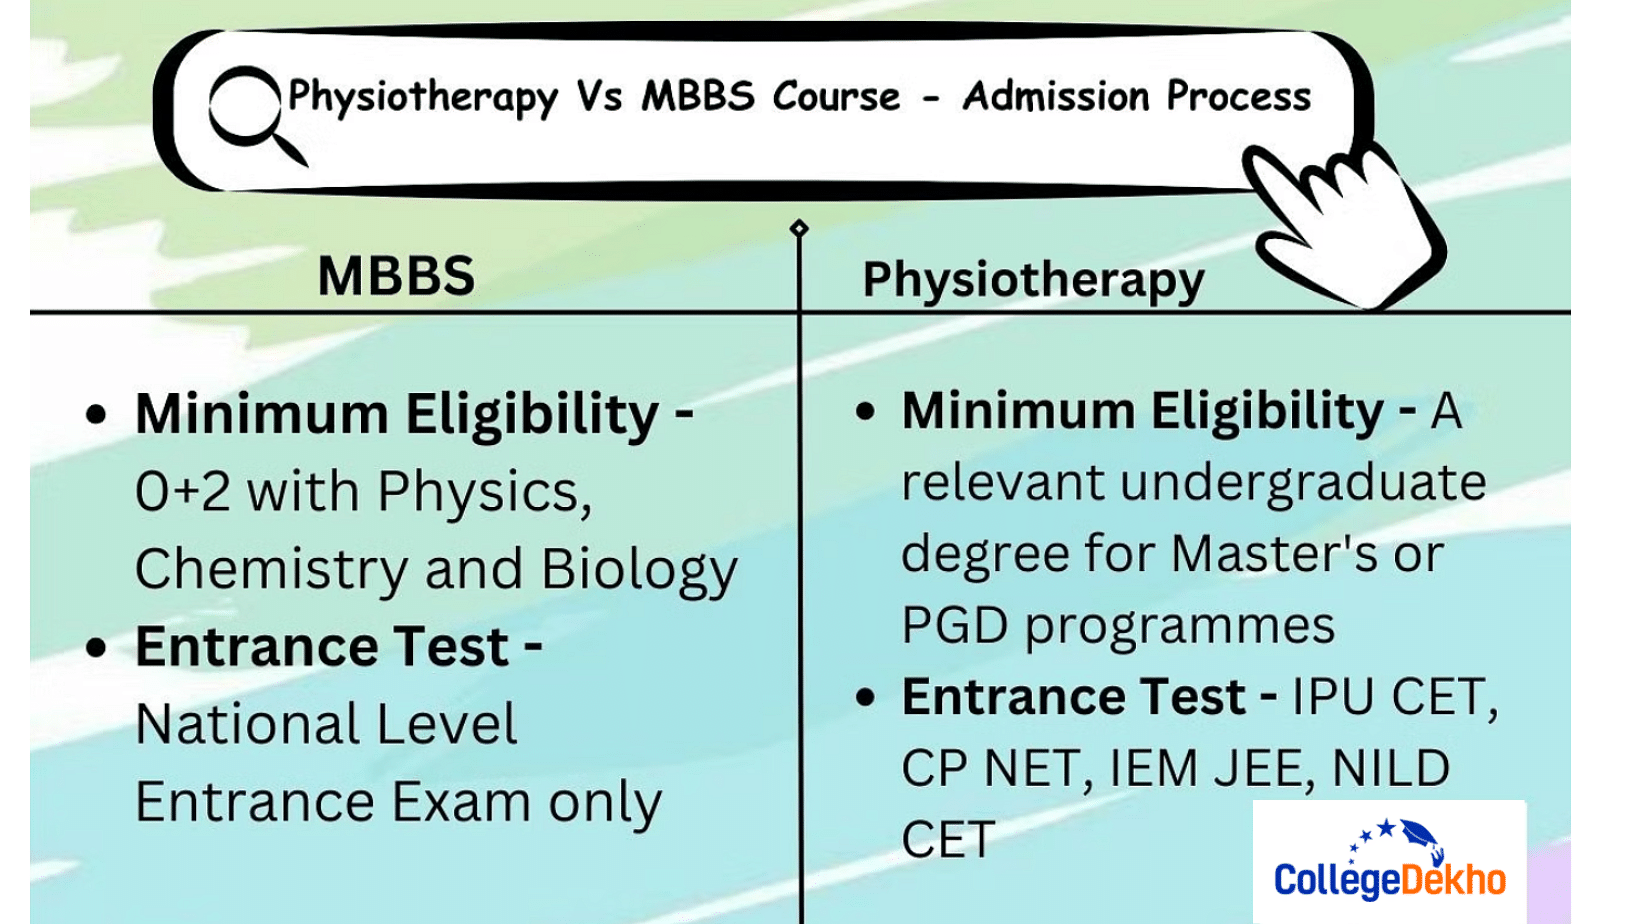 Physiotherapy vs MBBS Admission Process